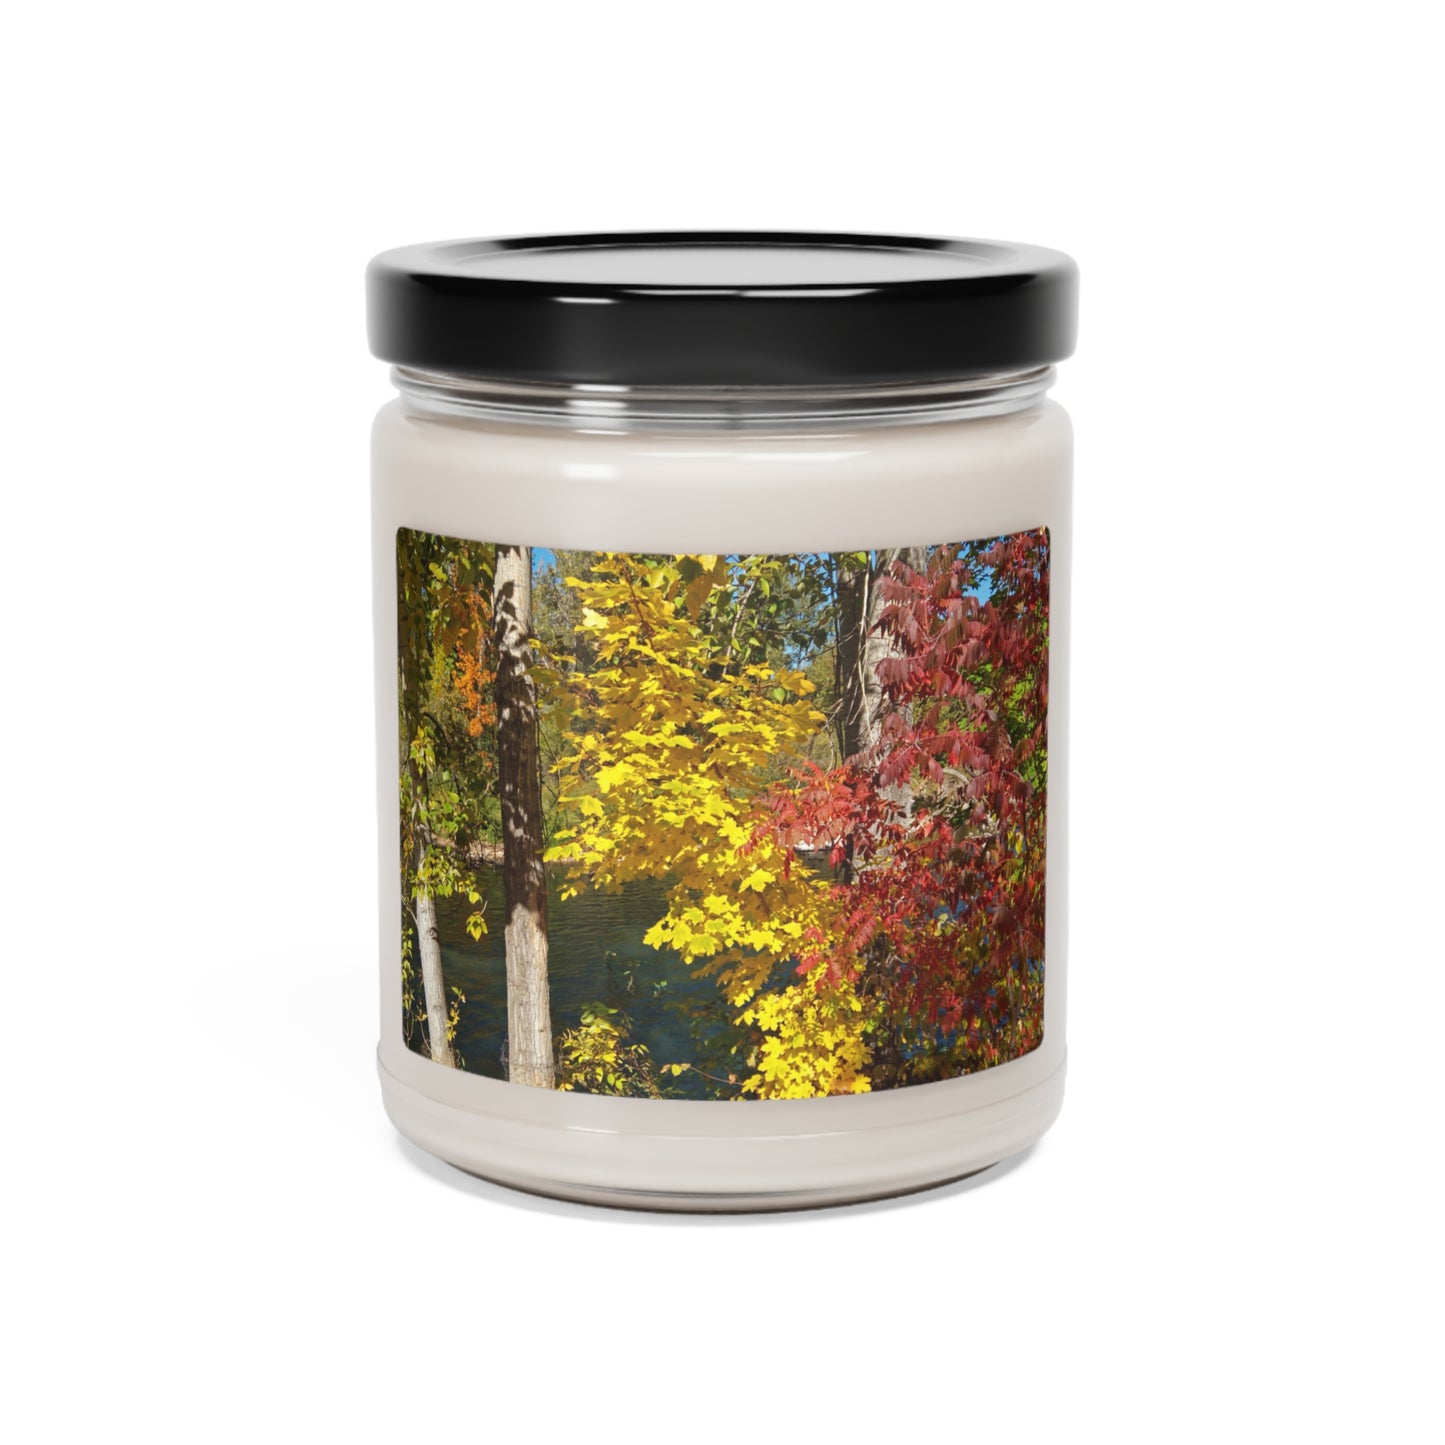 River & Autumn Leaves Scented Soy Candle, 9oz